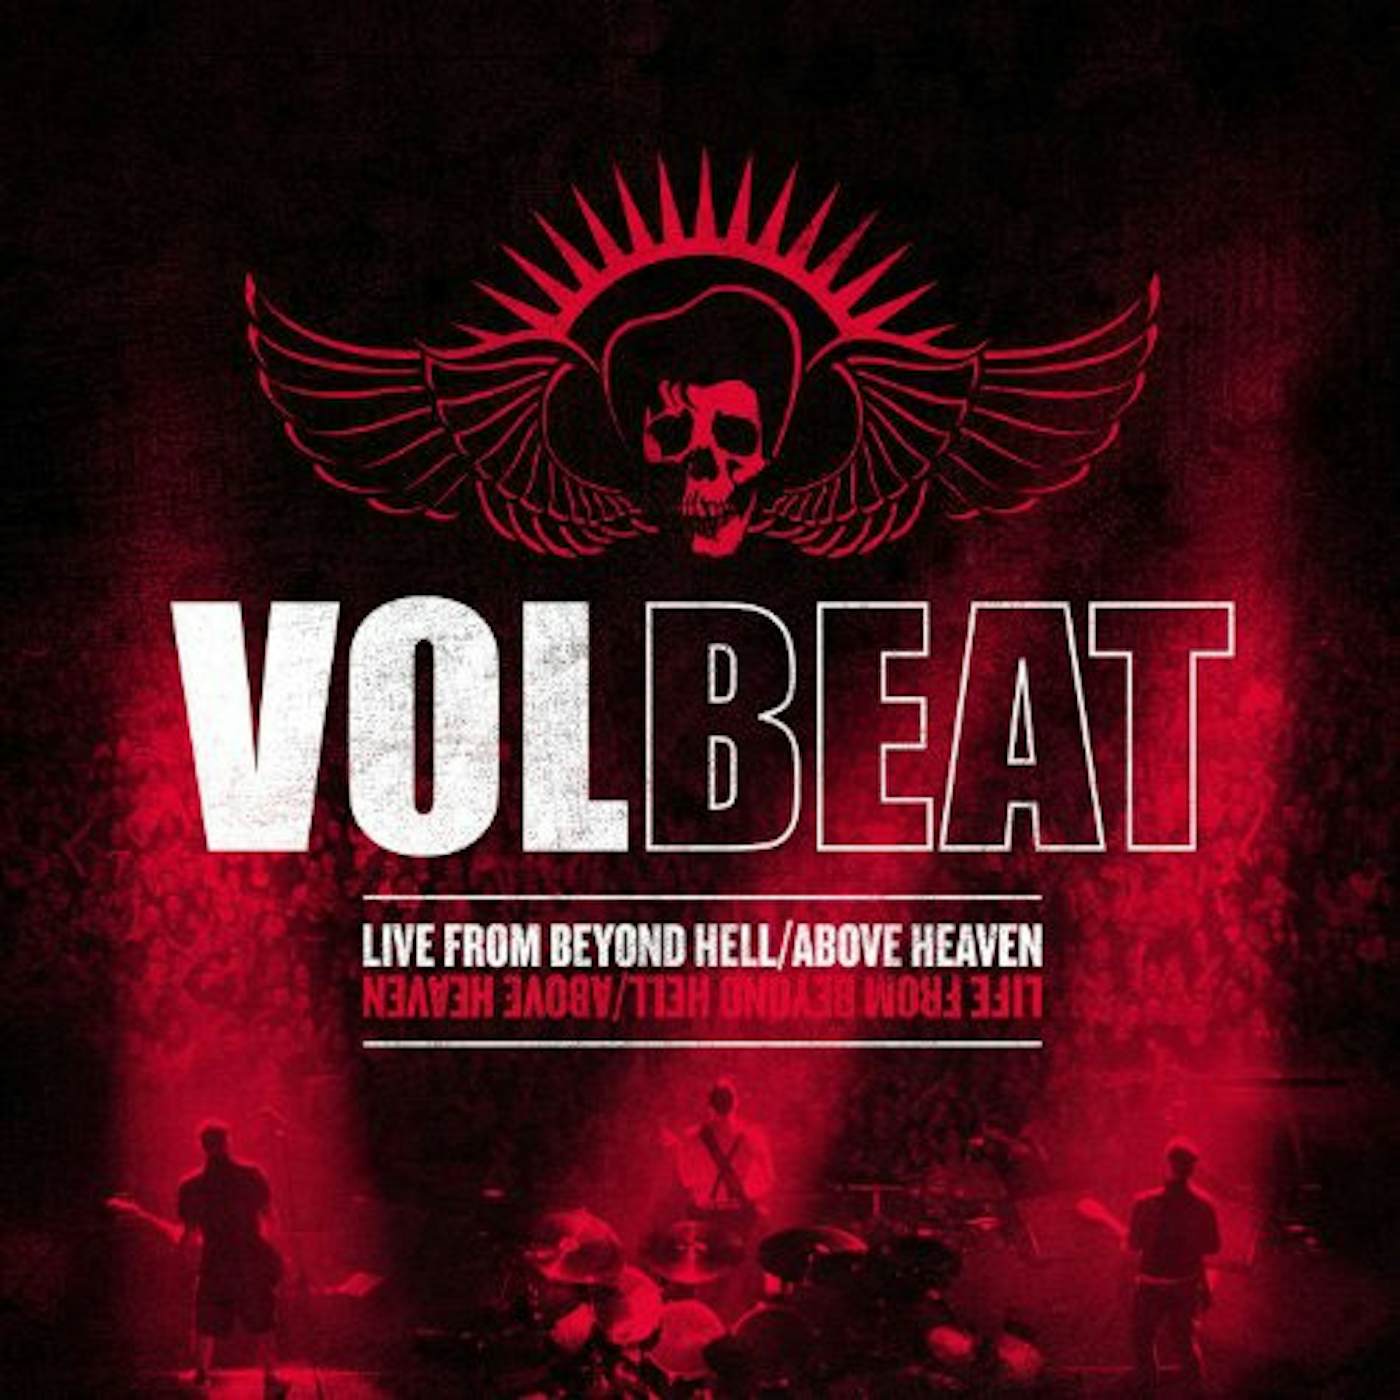 Volbeat Live From Beyond Hell / Above Heaven Vinyl Record